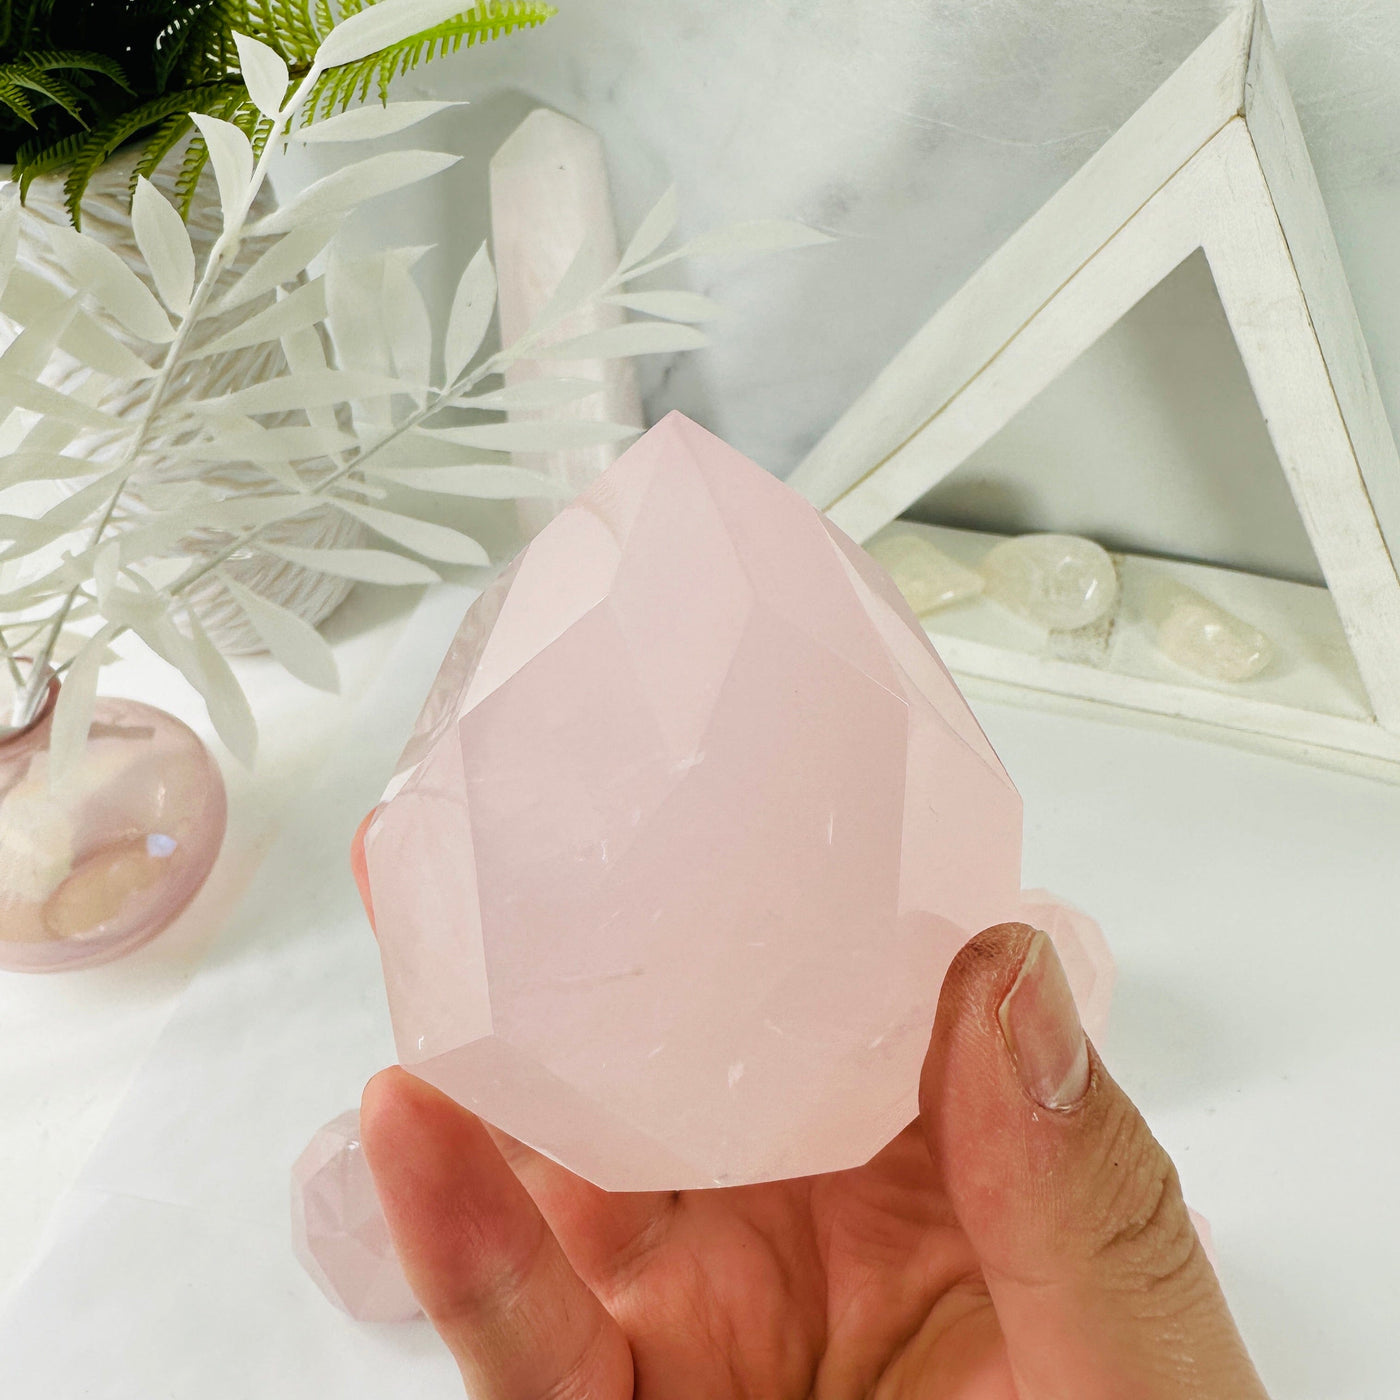  Rose Quartz Faceted Crystal Egg Point - You Choose - variant 1 in hand for size reference